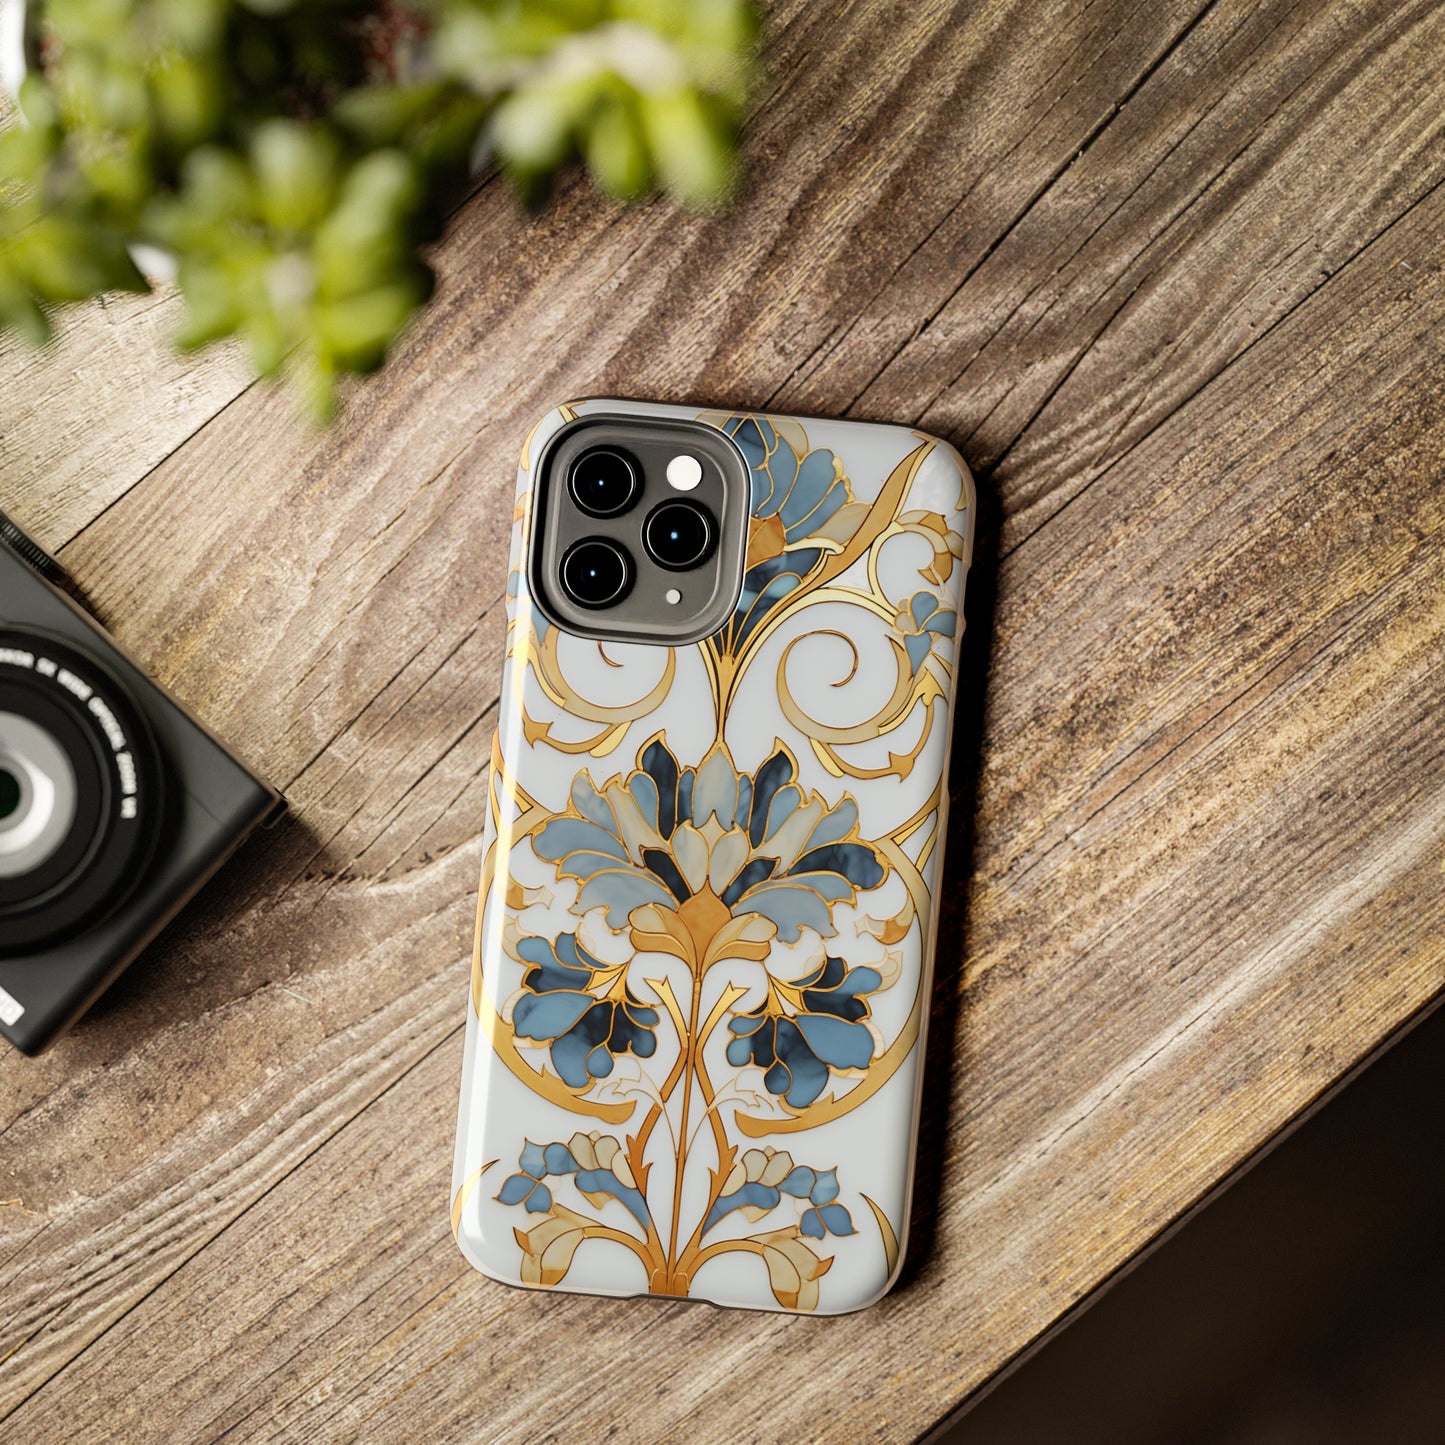 Art Deco Stained Glass iPhone Case